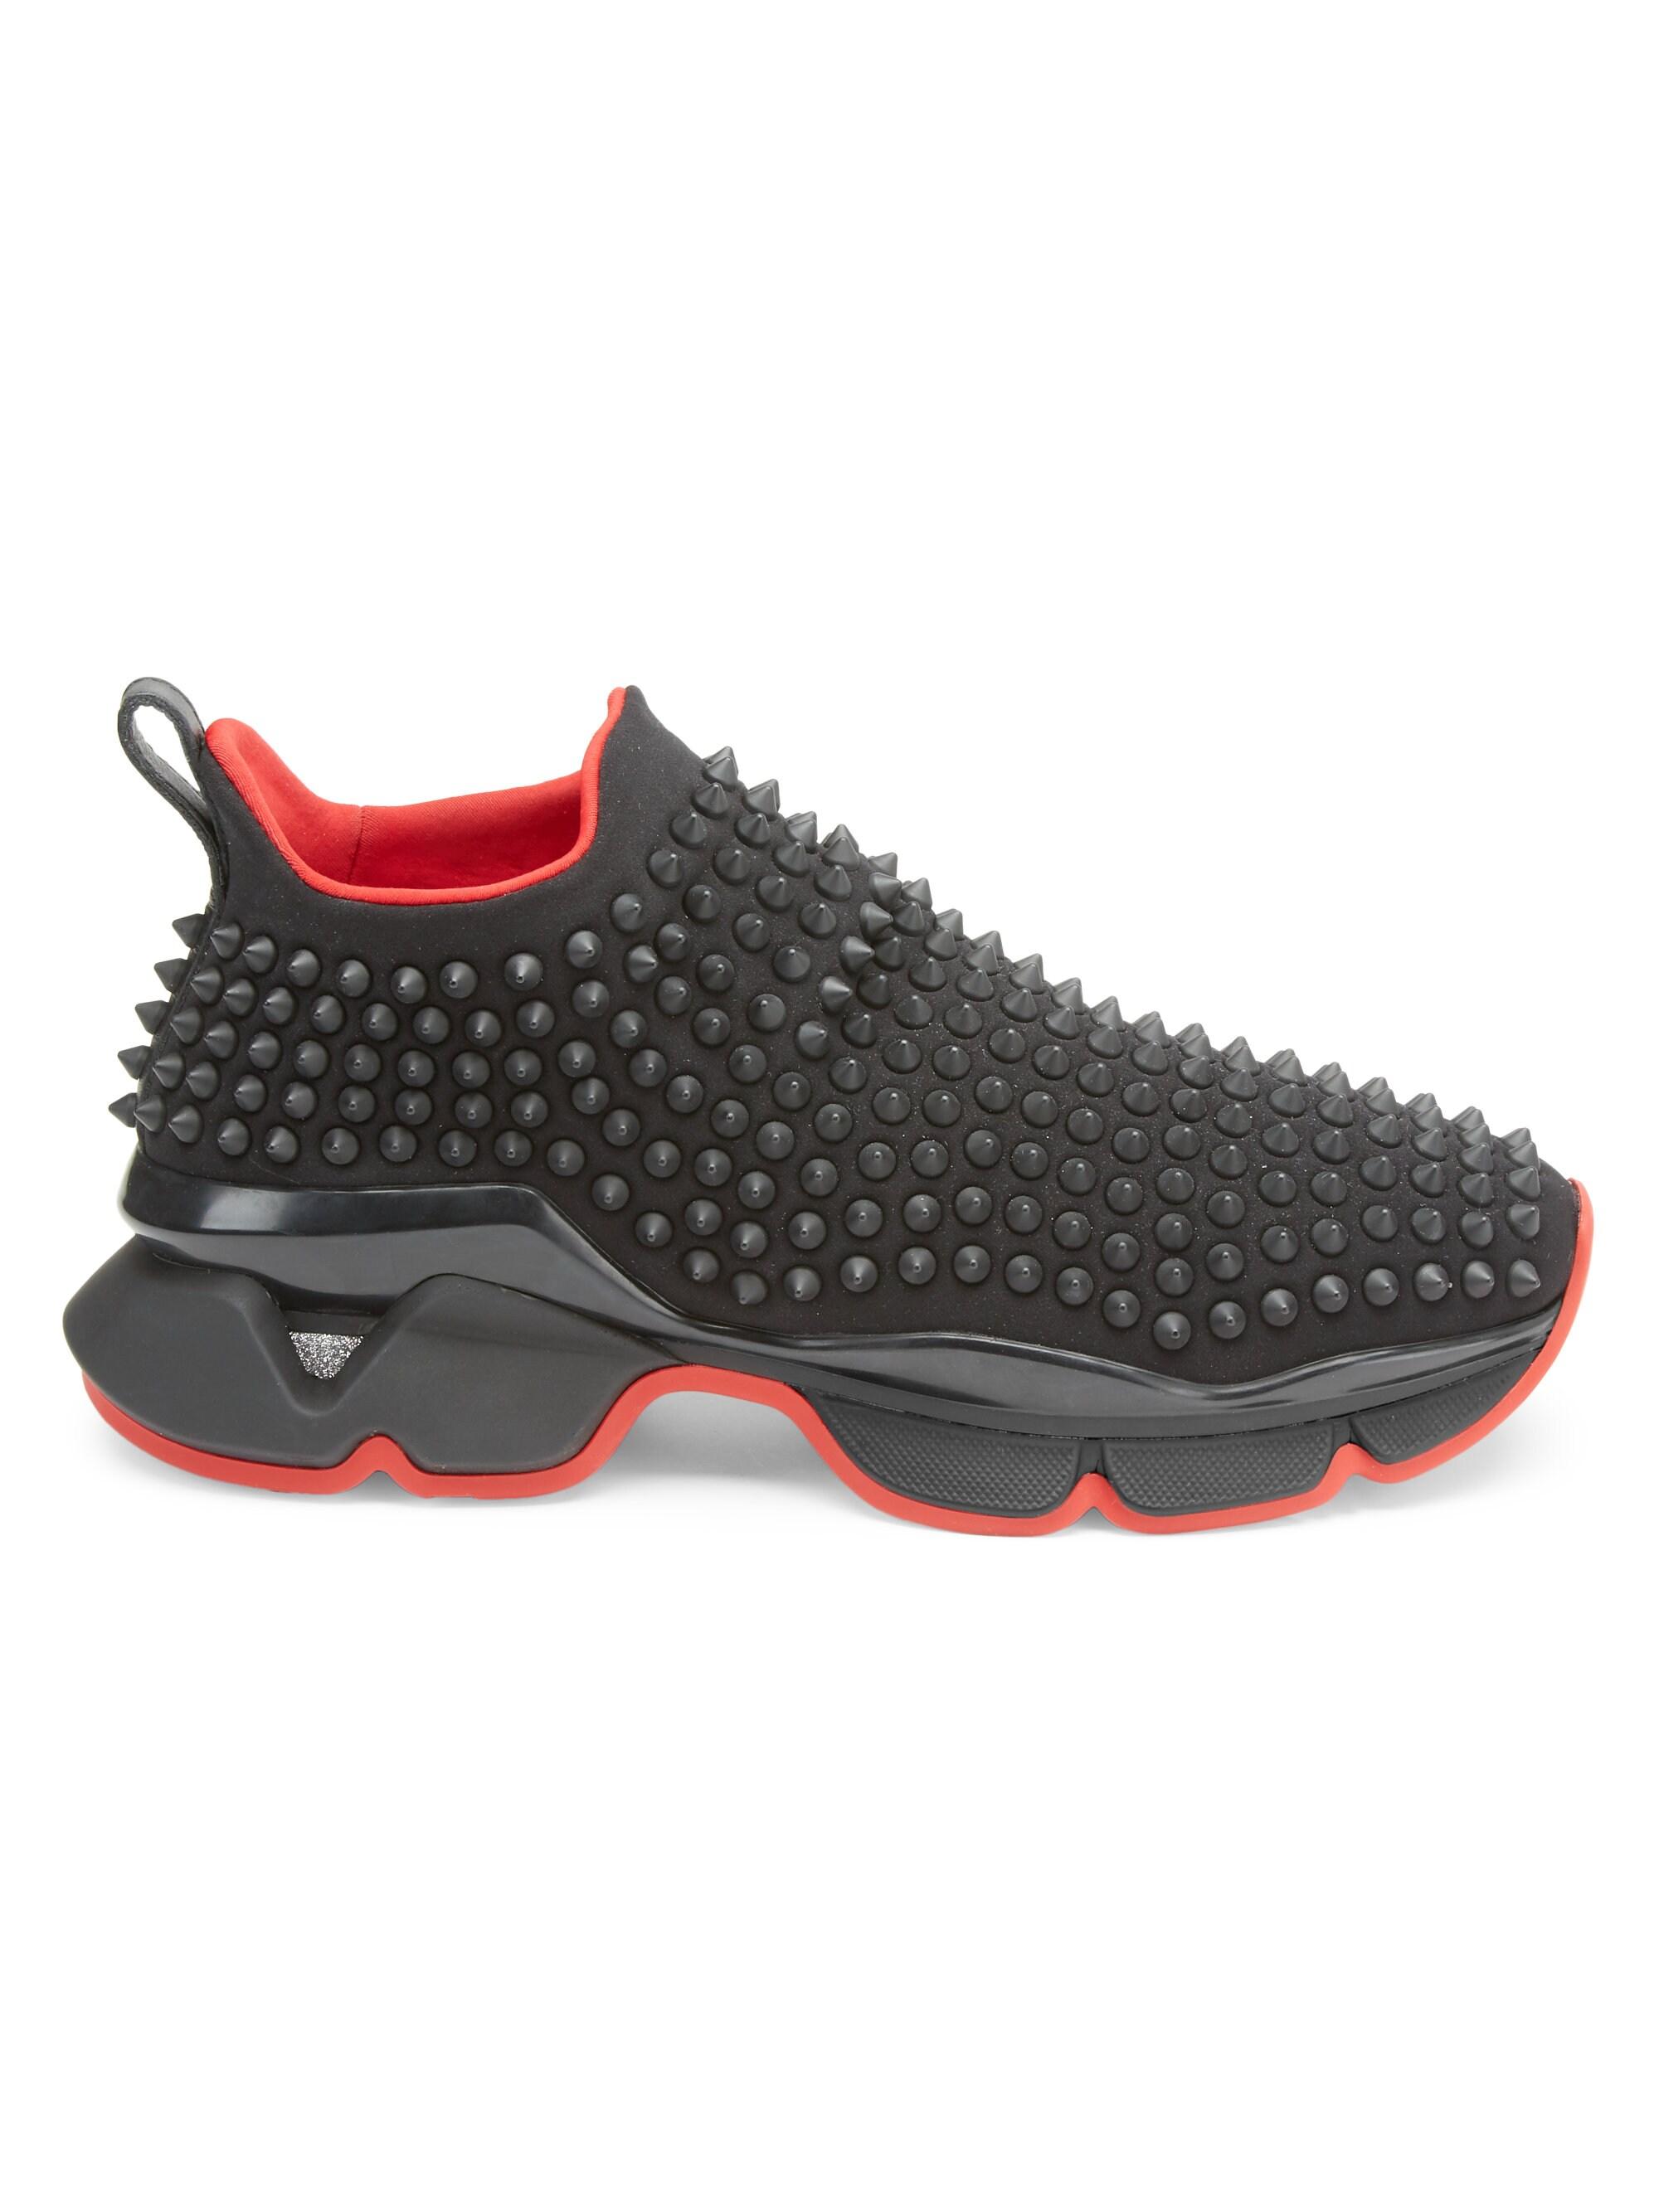 Christian Louboutin Spike Sock Donna Flat Sneakers in Black - Save 6% ...